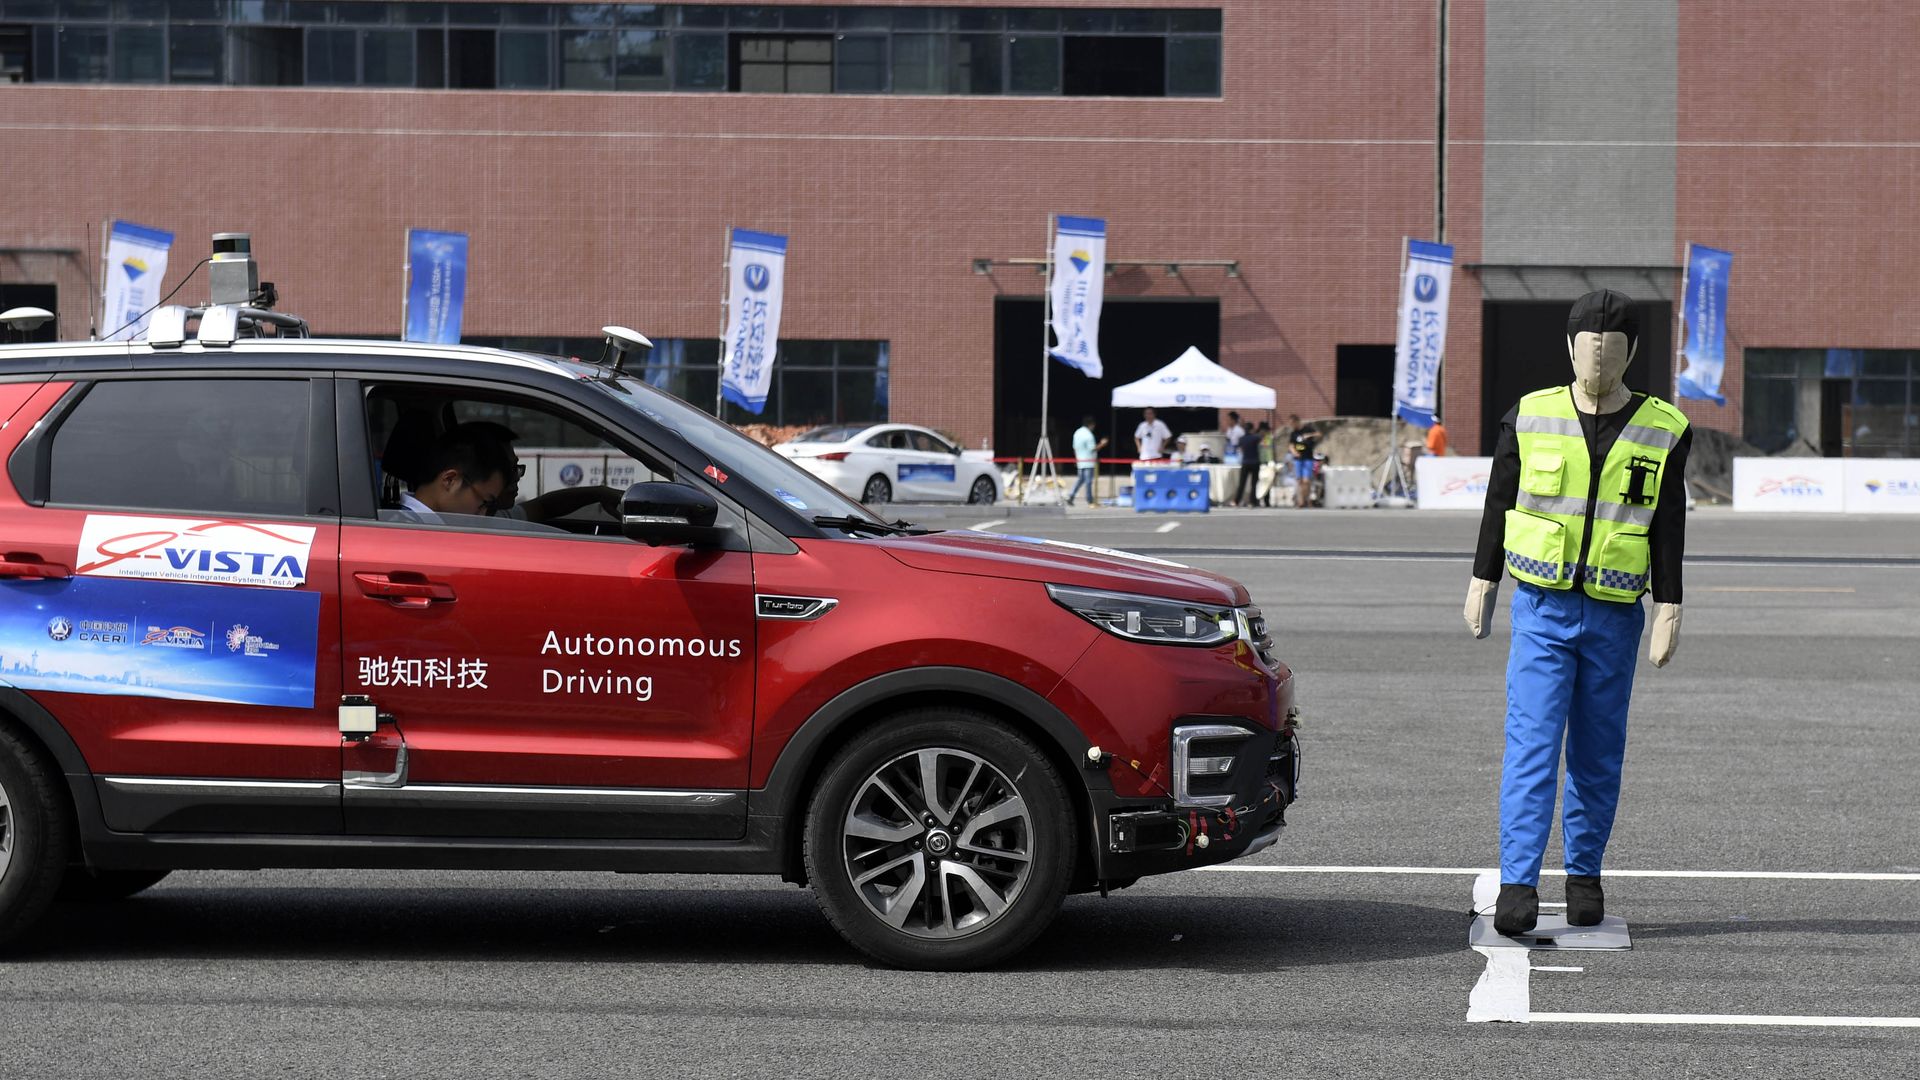 "Do no harm" is a poor standard for self-driving cars